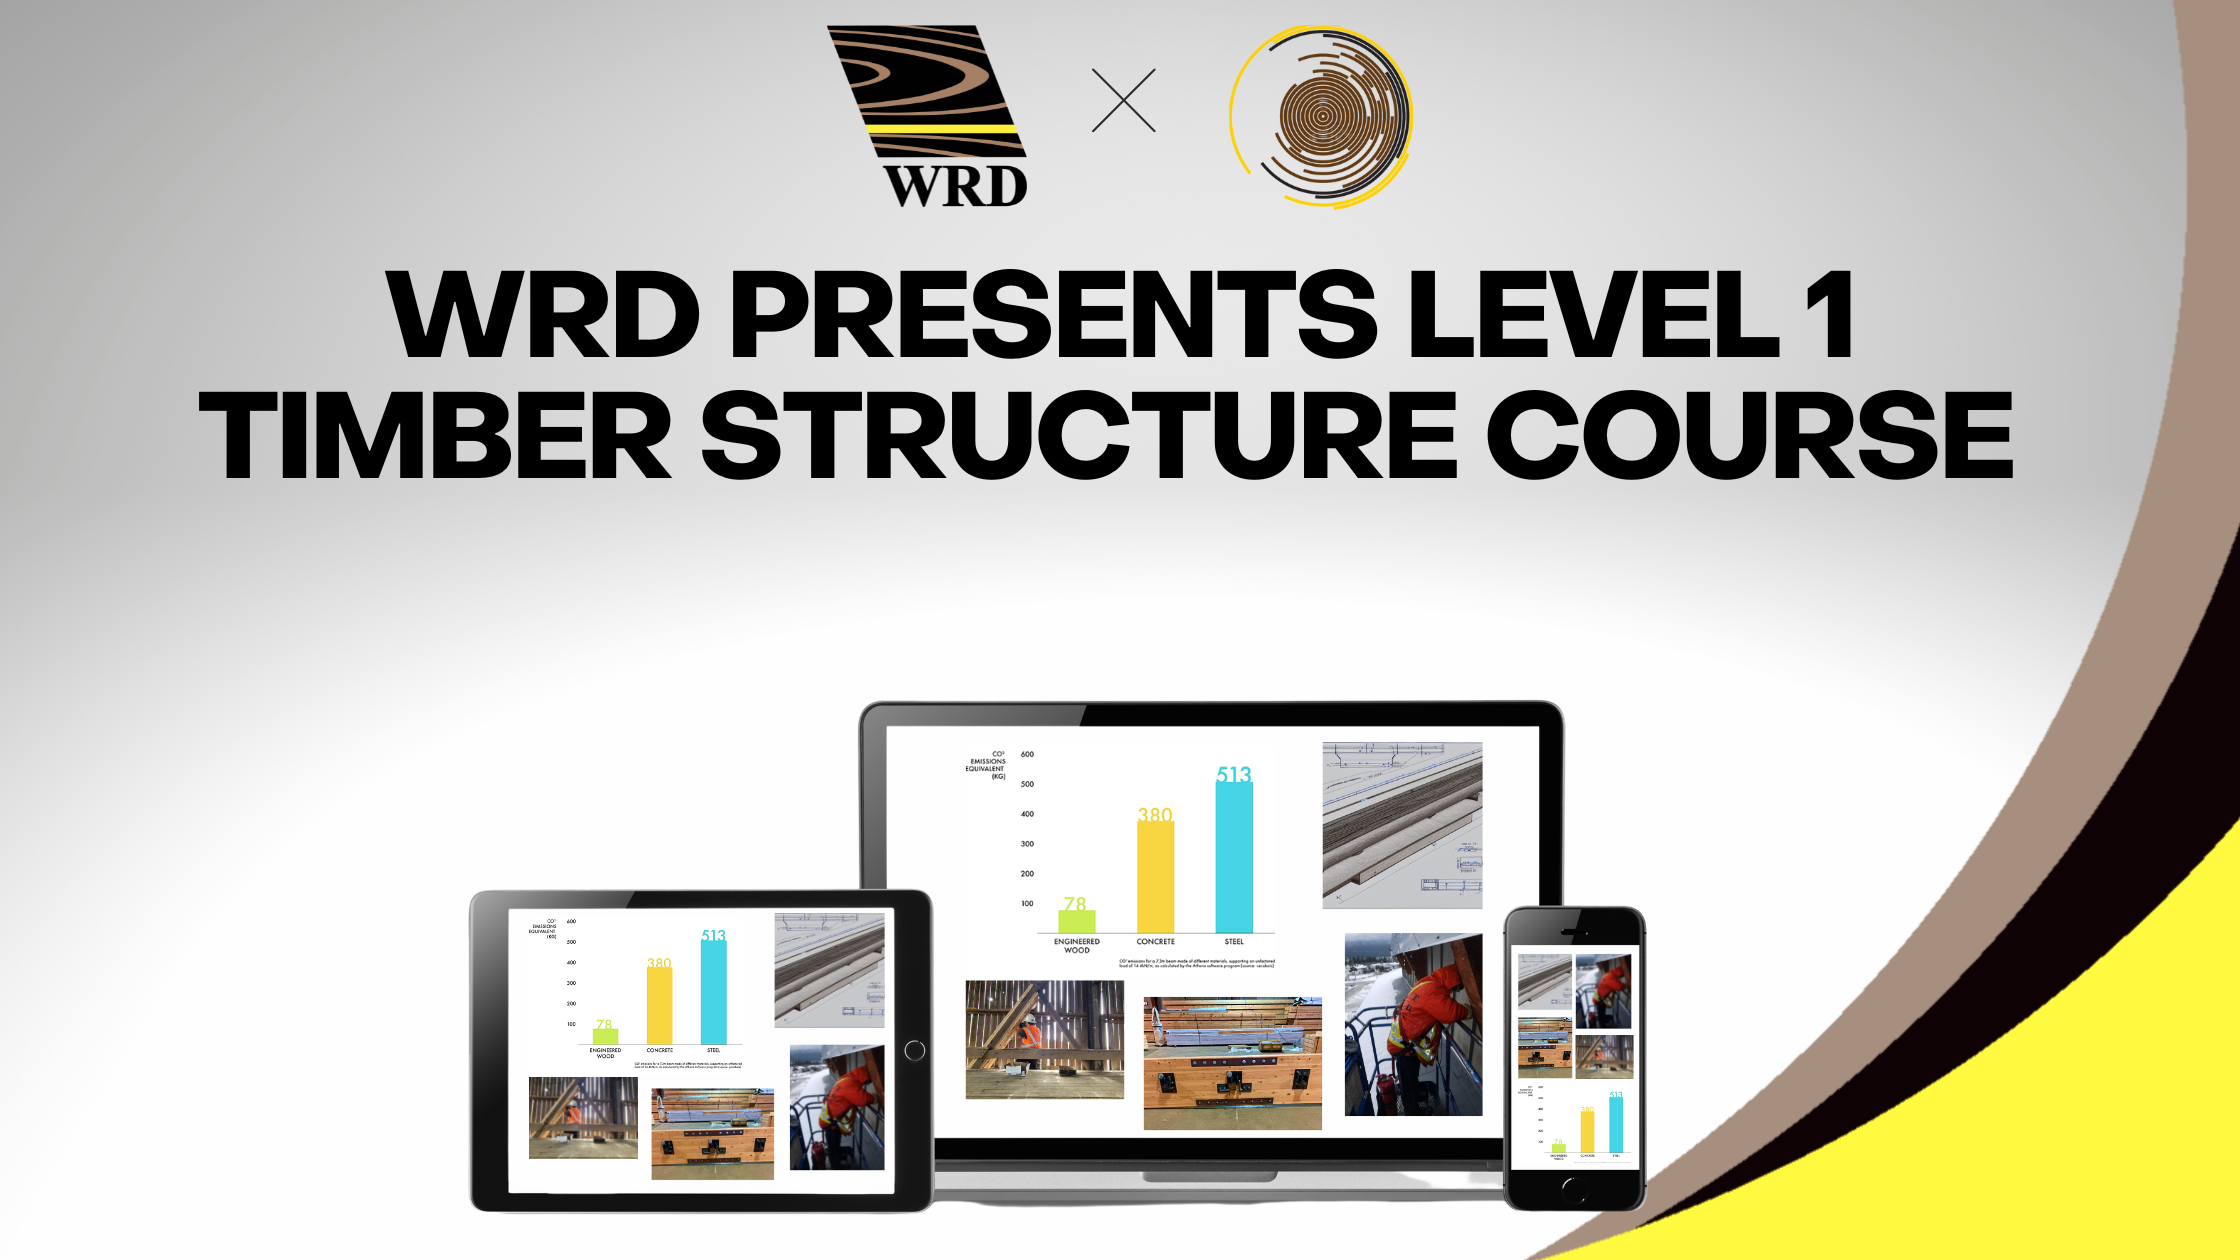 Wood Research and Development is partnering with Timber Restoration Services to host a Level 1 virtual Timber Structures Course that covers timber and wood bridge inspections and wood and timber building inspections. The course also goes over wood testing and timber testing along with retrofitting and design of the preservation of historical wood and timber structures